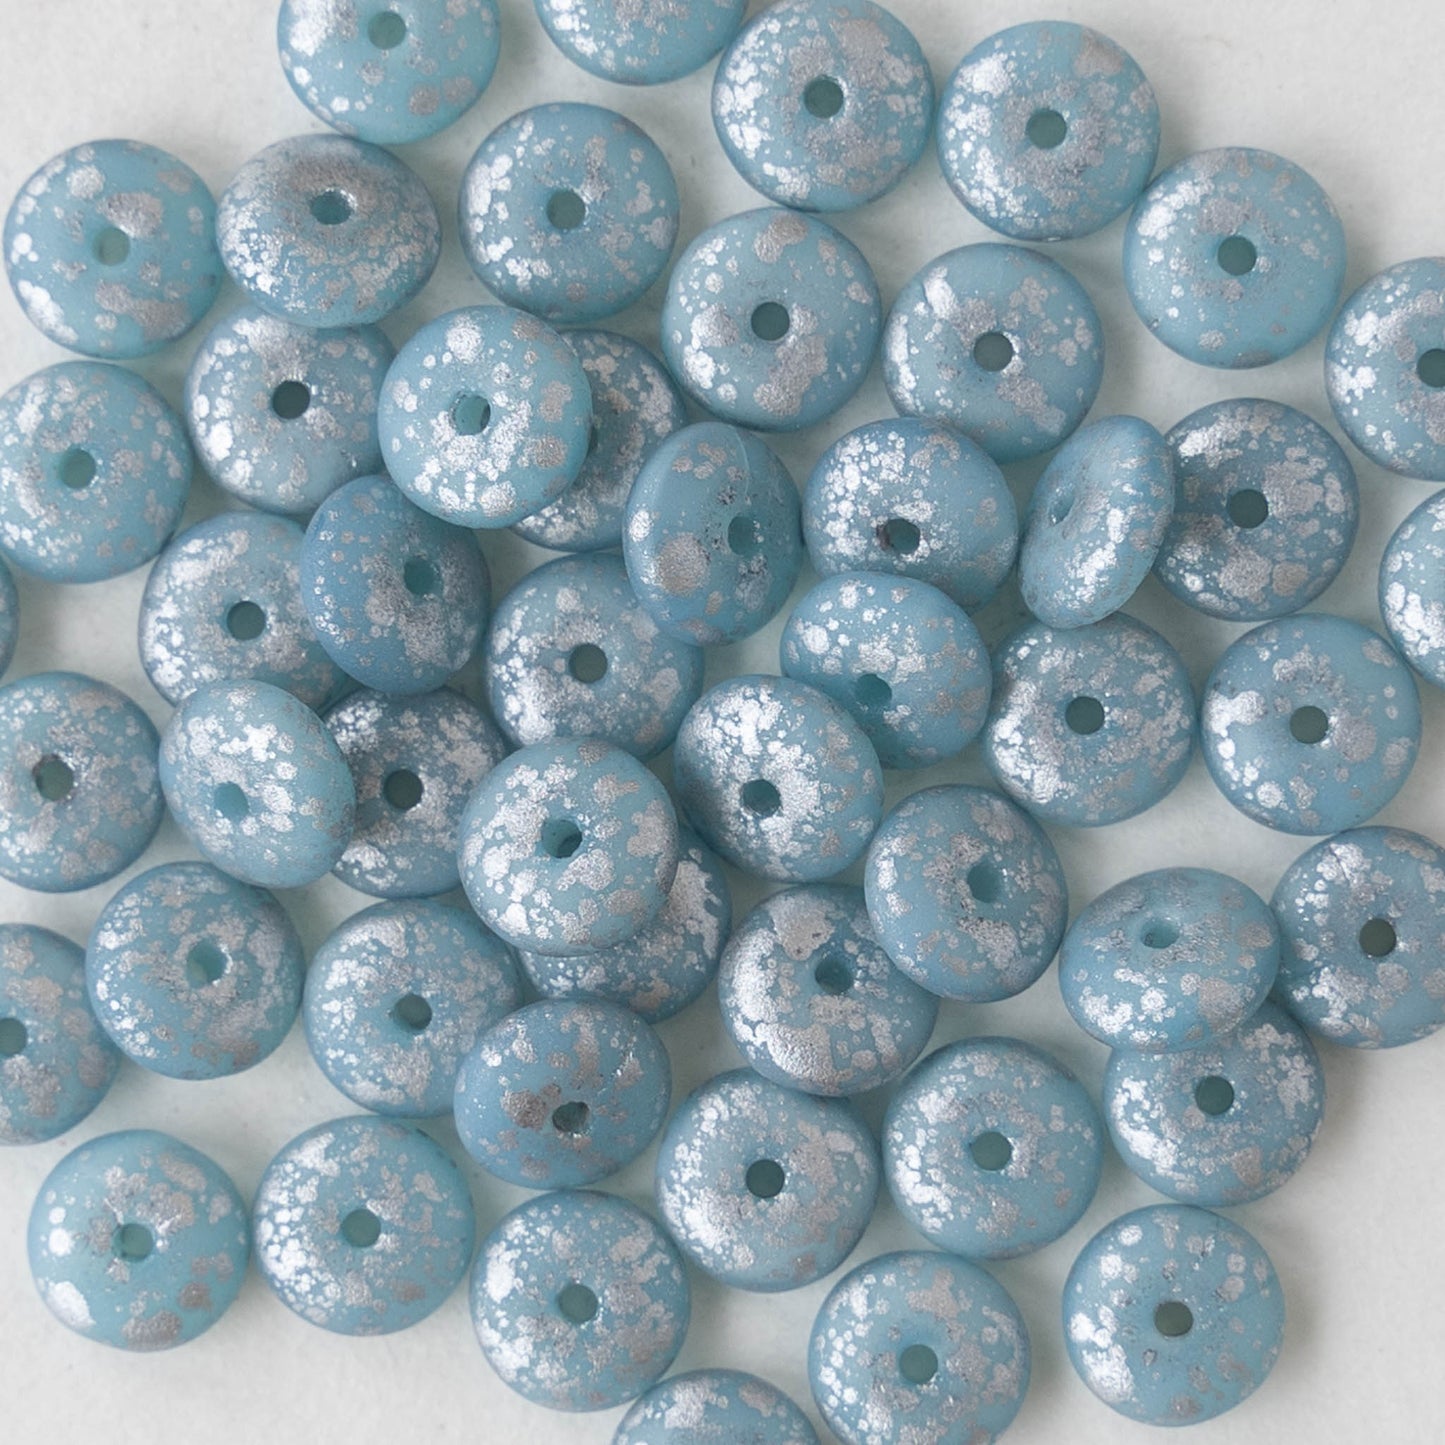 6mm Rondelle Beads - Blue Silk with Silver Dust - 50 Beads